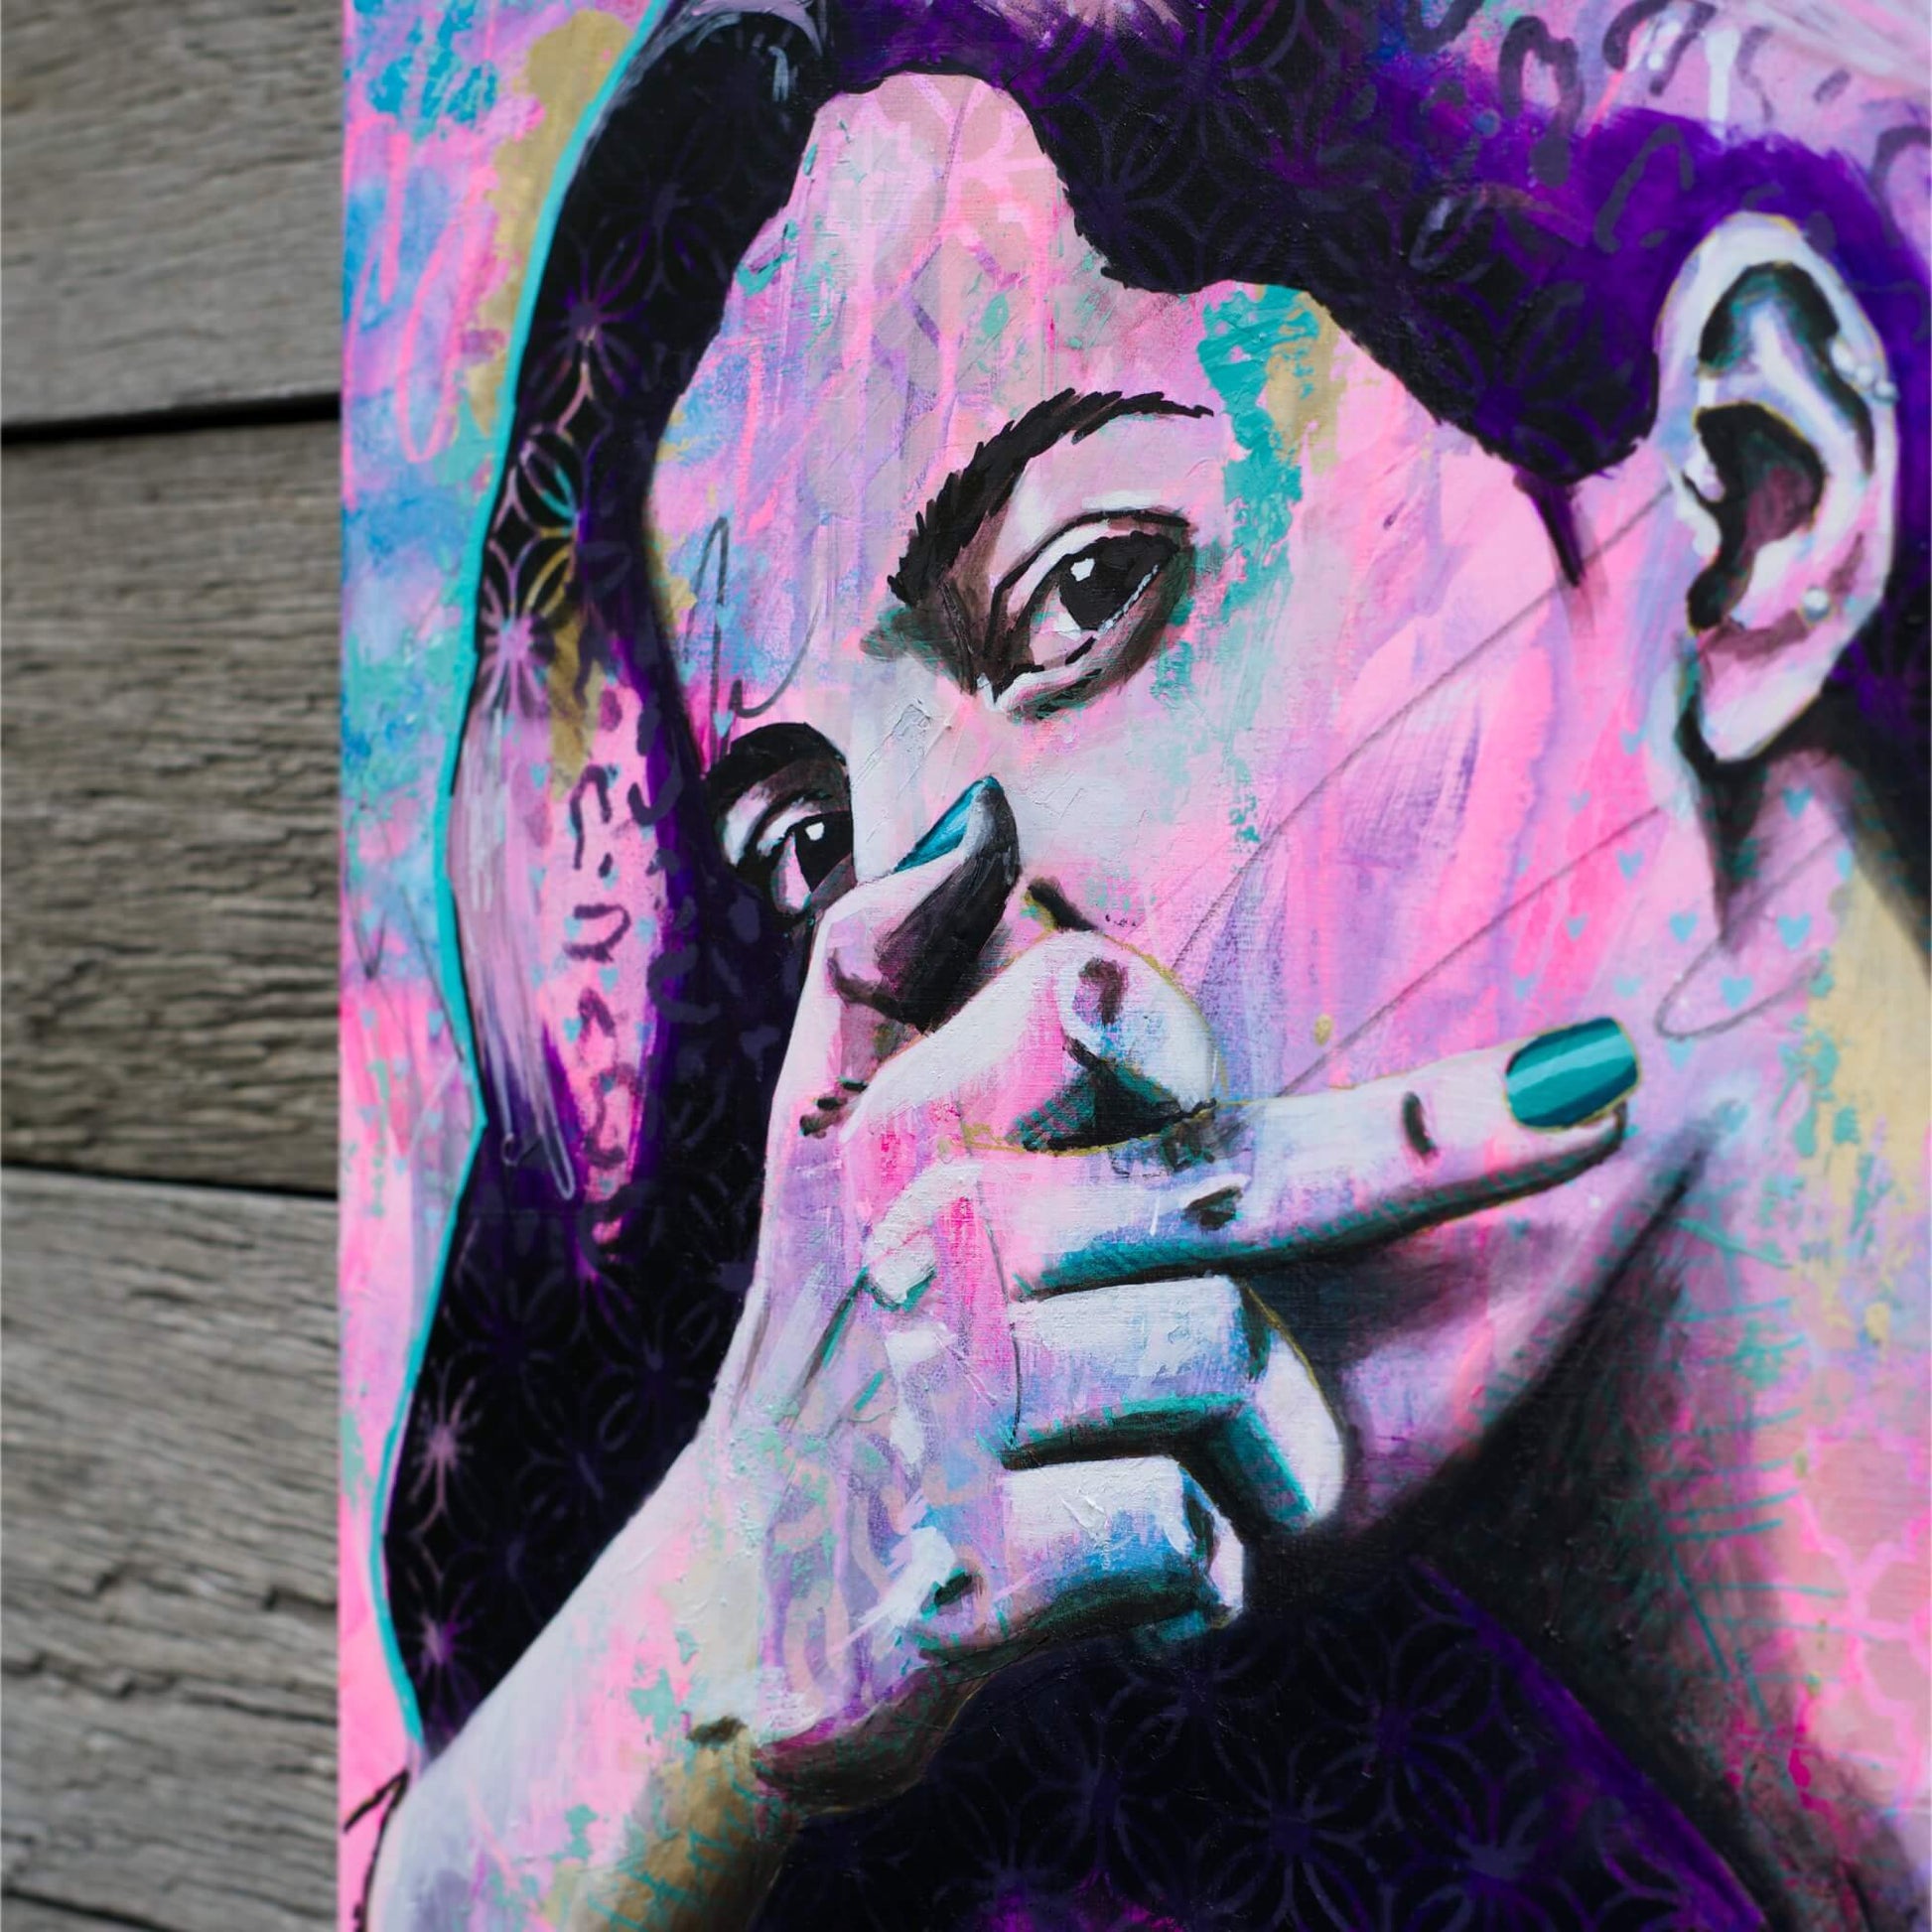 Artworks for Sale – Street Art Painting of Woman - Purple, Hot Pink & Teal – 'Take a Break' – Art Wall Painting Criss Chaney